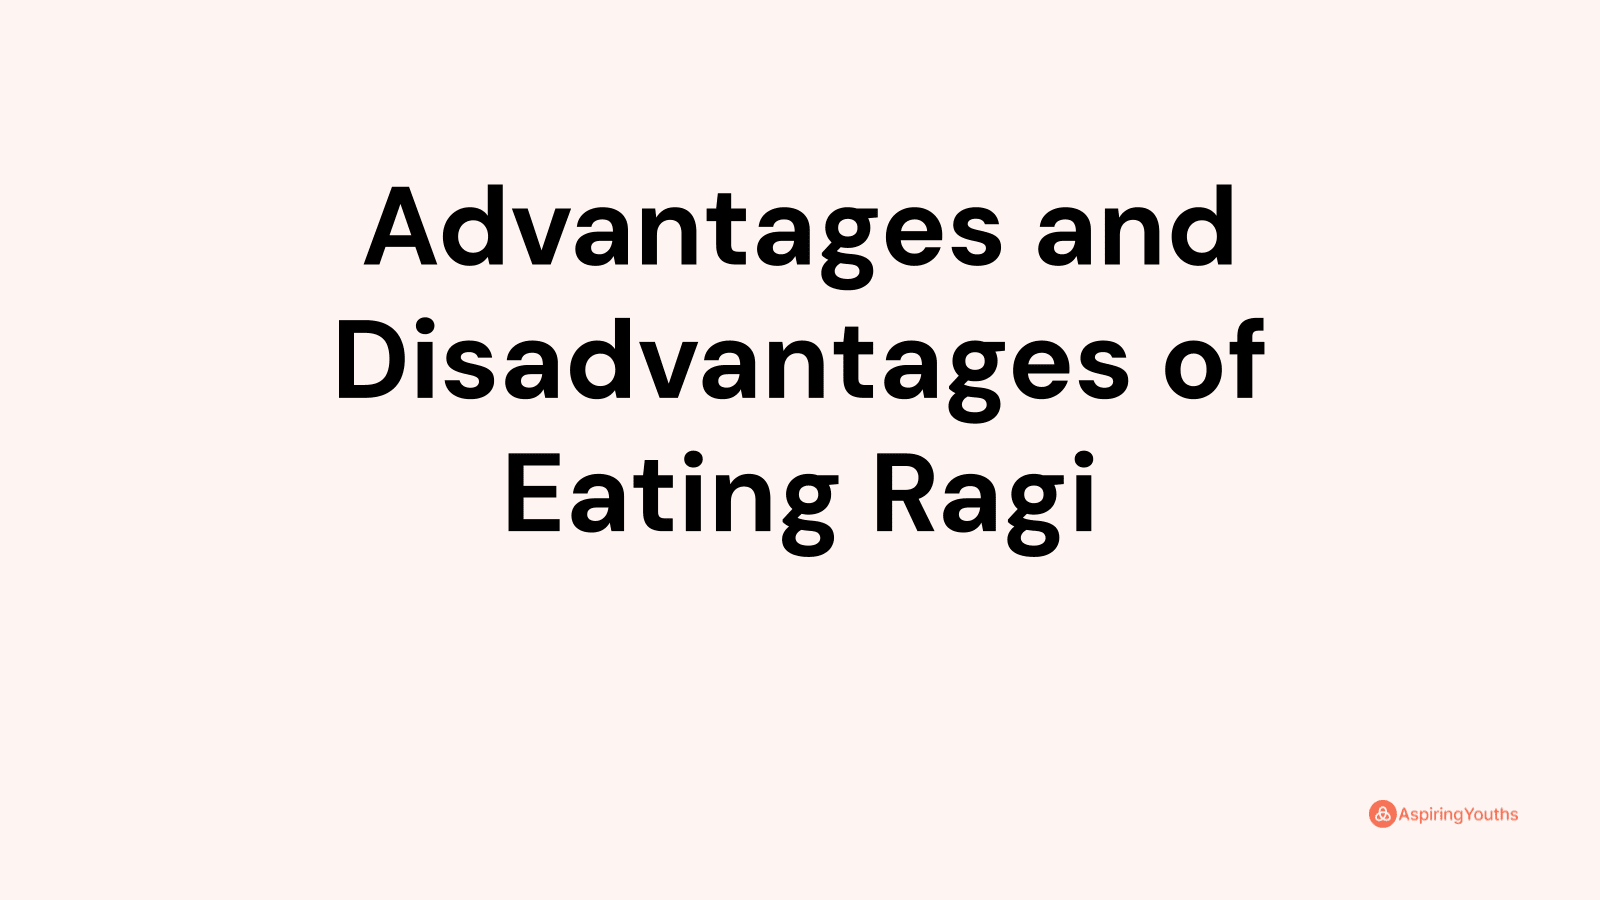 Advantages and disadvantages of Eating Ragi